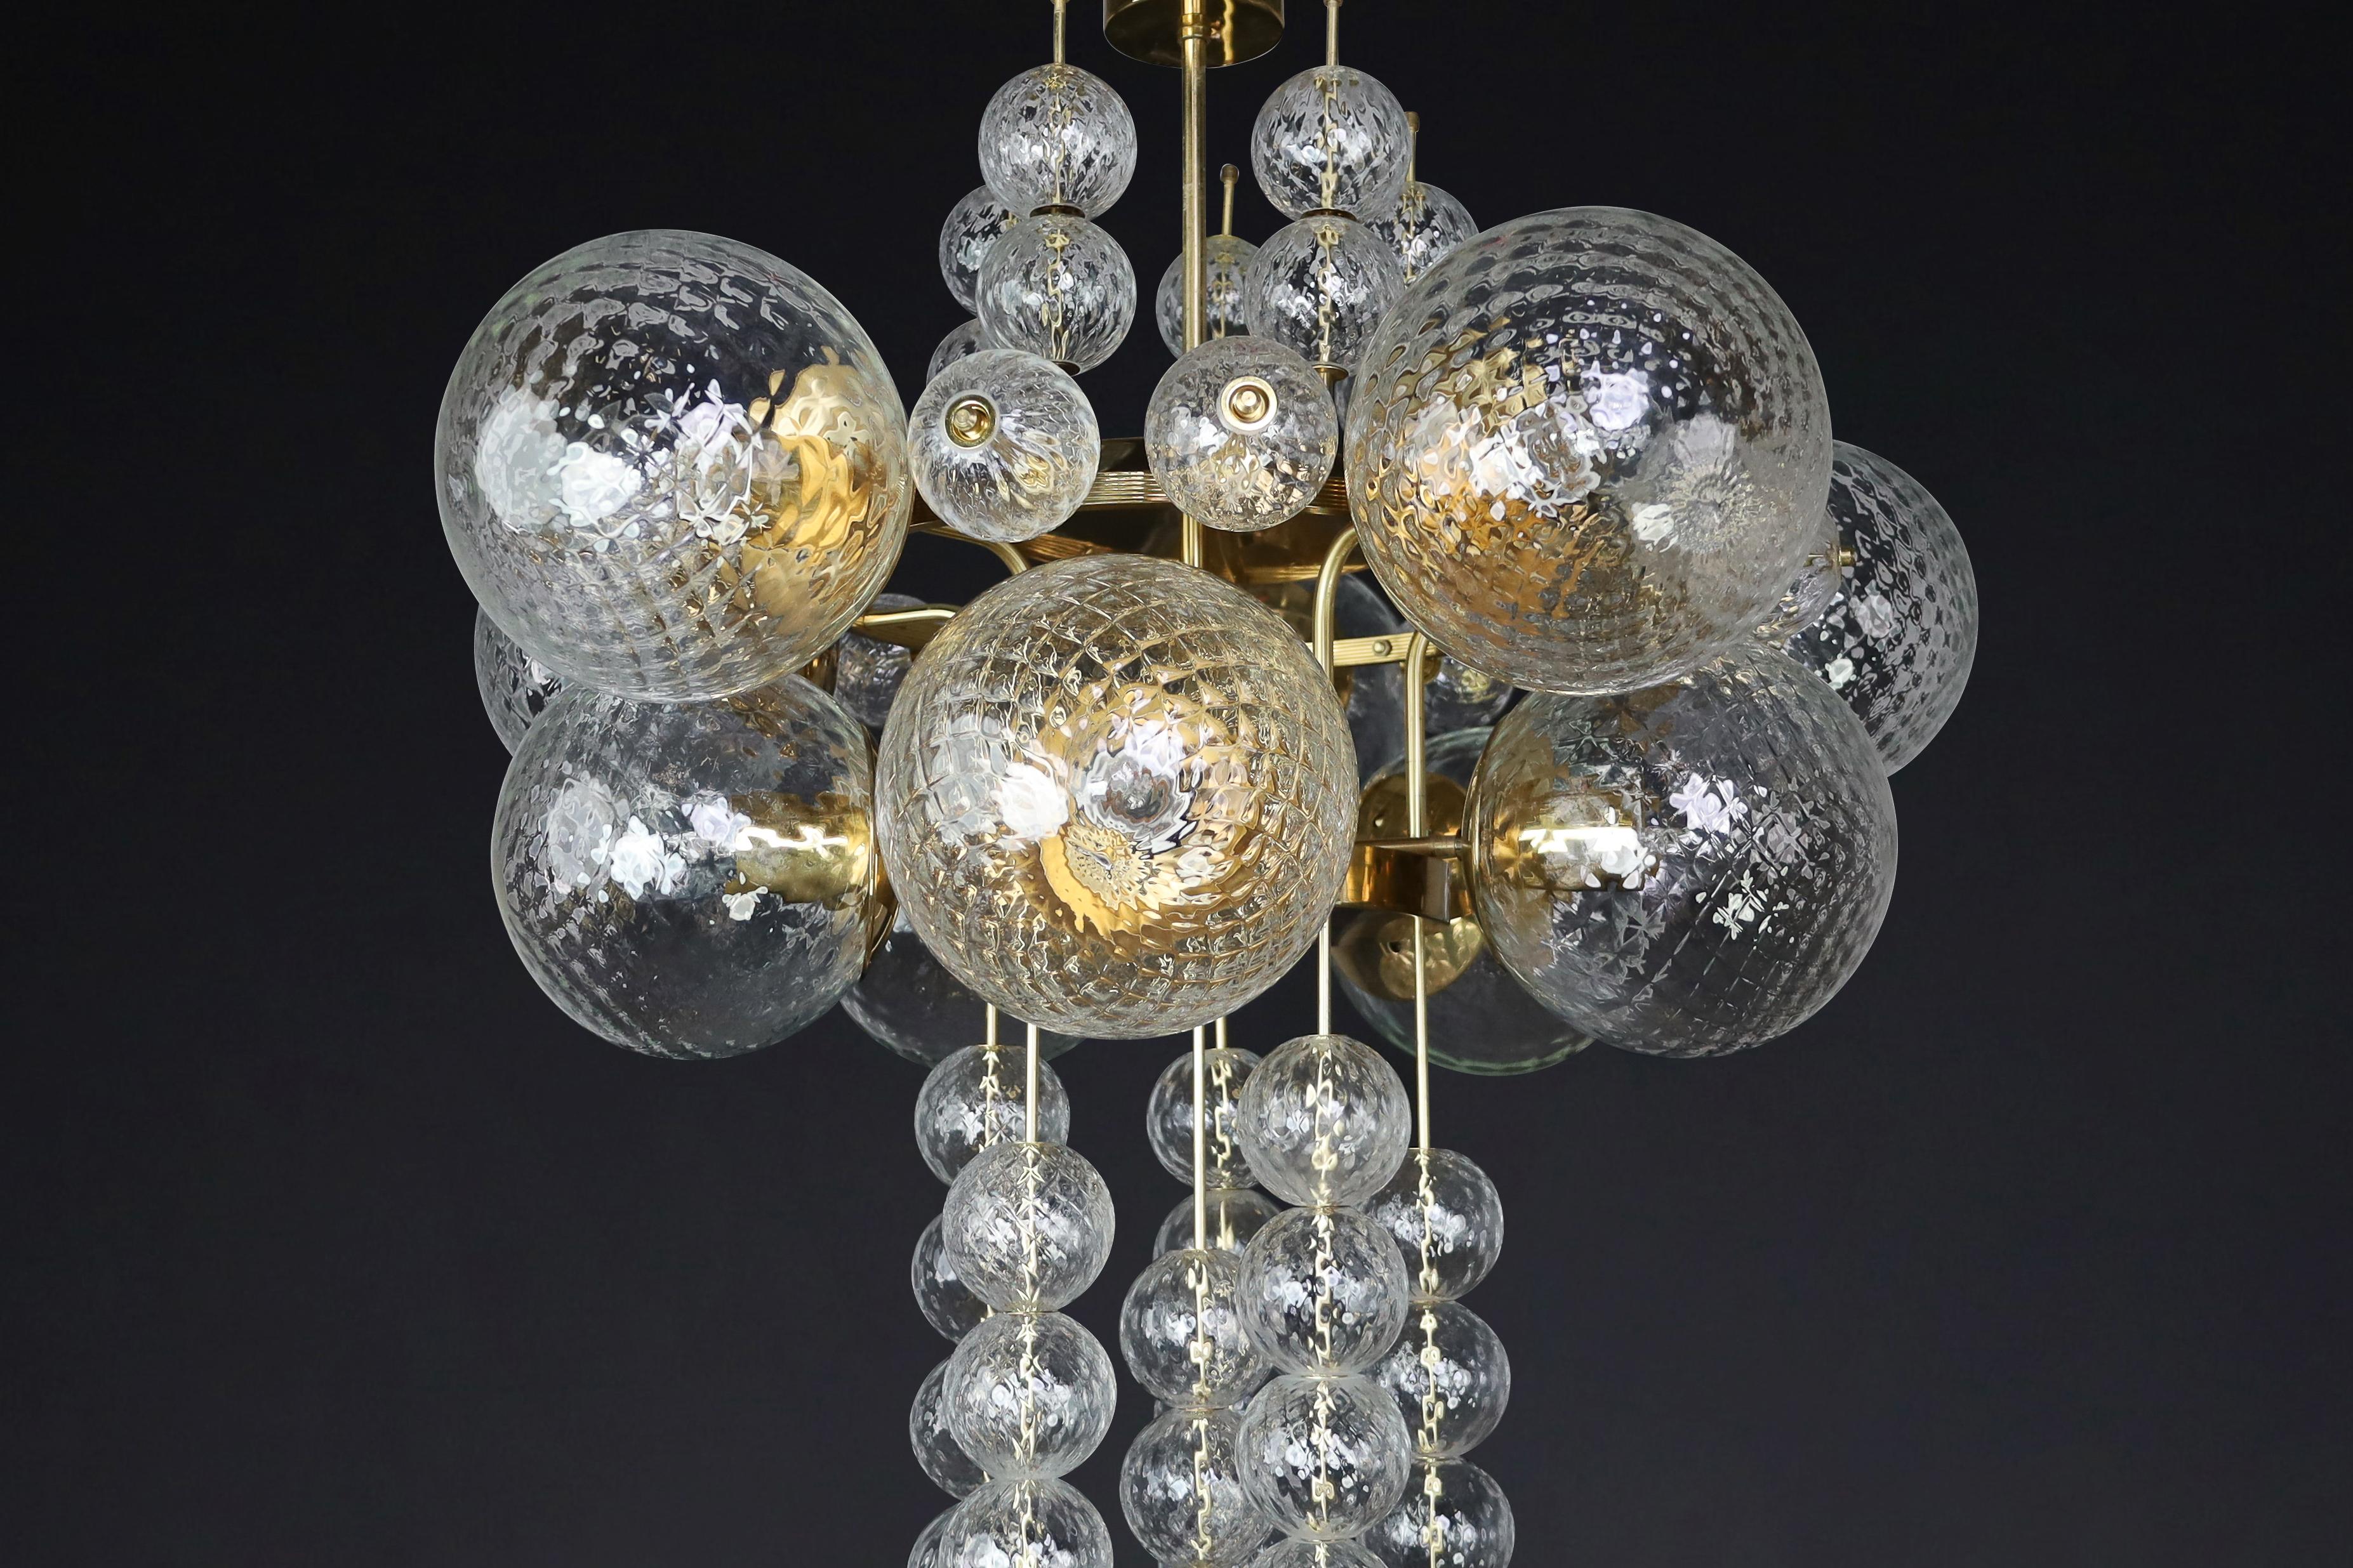 Large Chandelier with brass fixture and hand-blowed glass globes by Preciosa Cz. For Sale 9